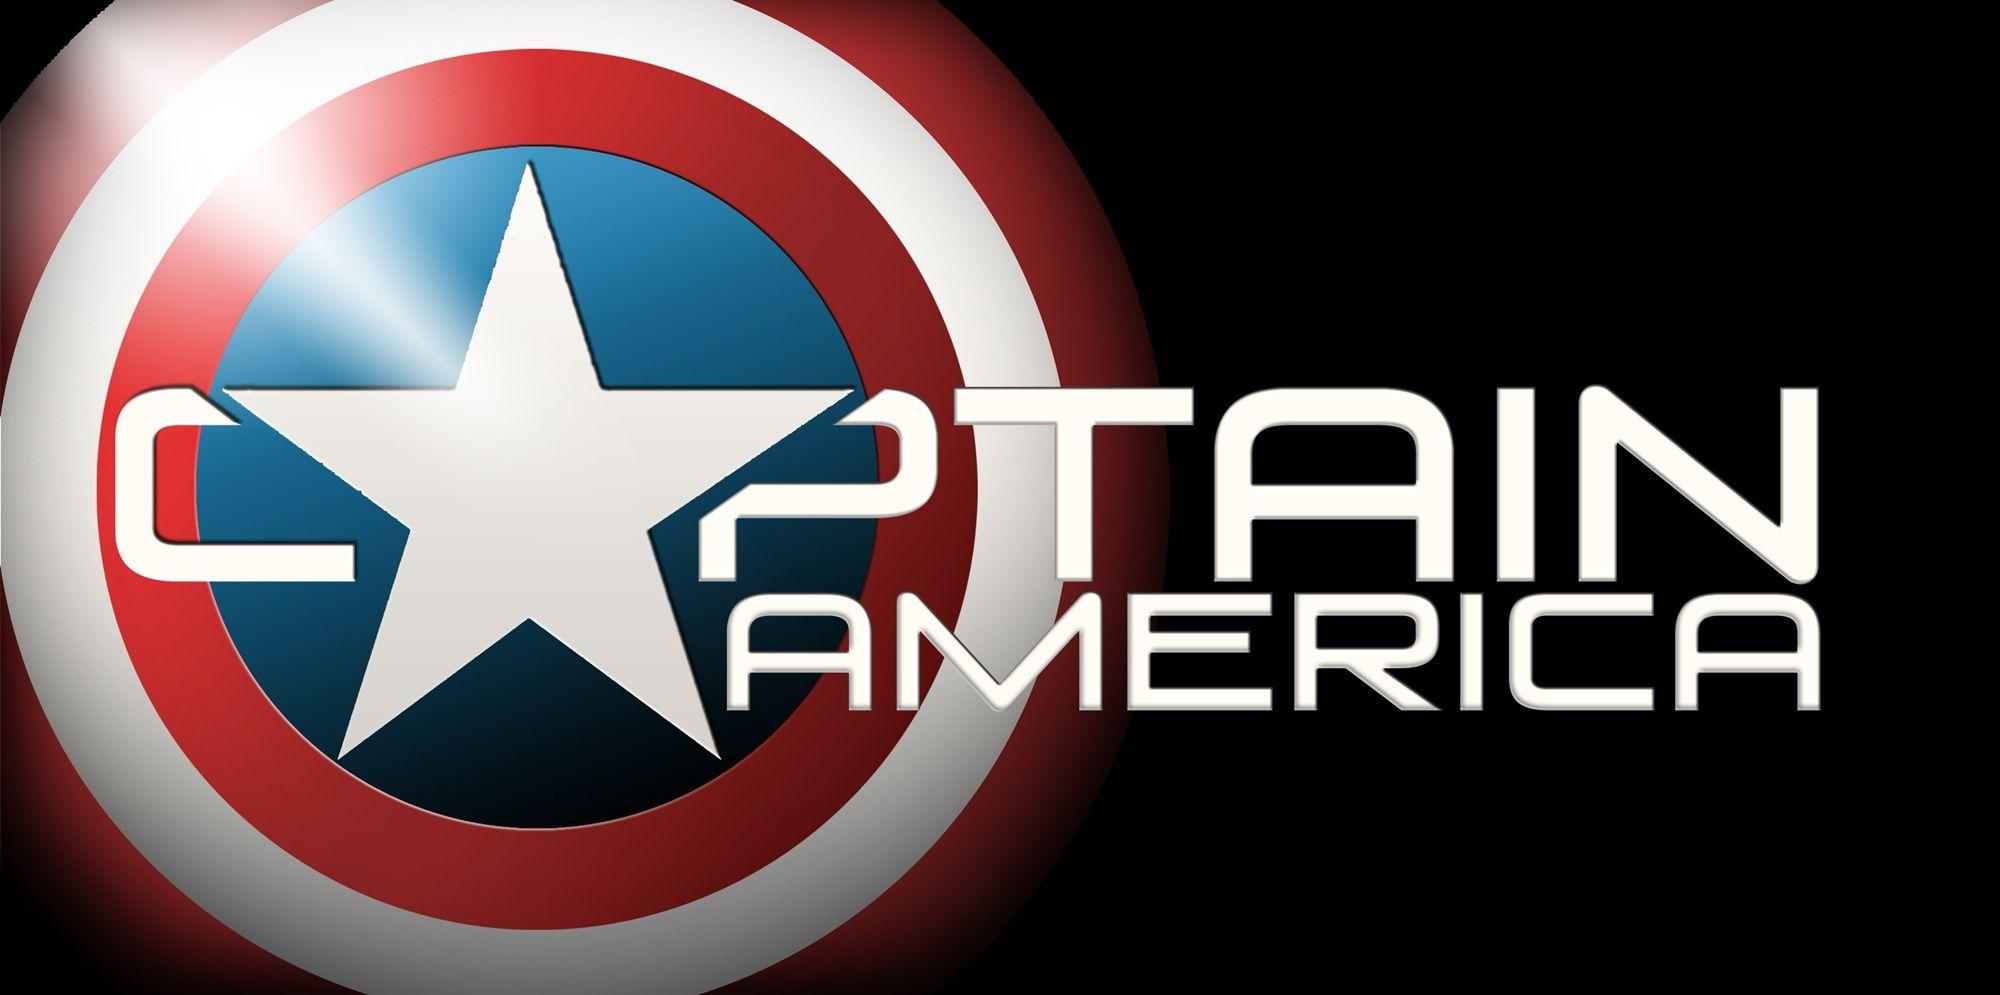 Captain America Logo - Captain America Logo Wallpaper - HD Wallpapers